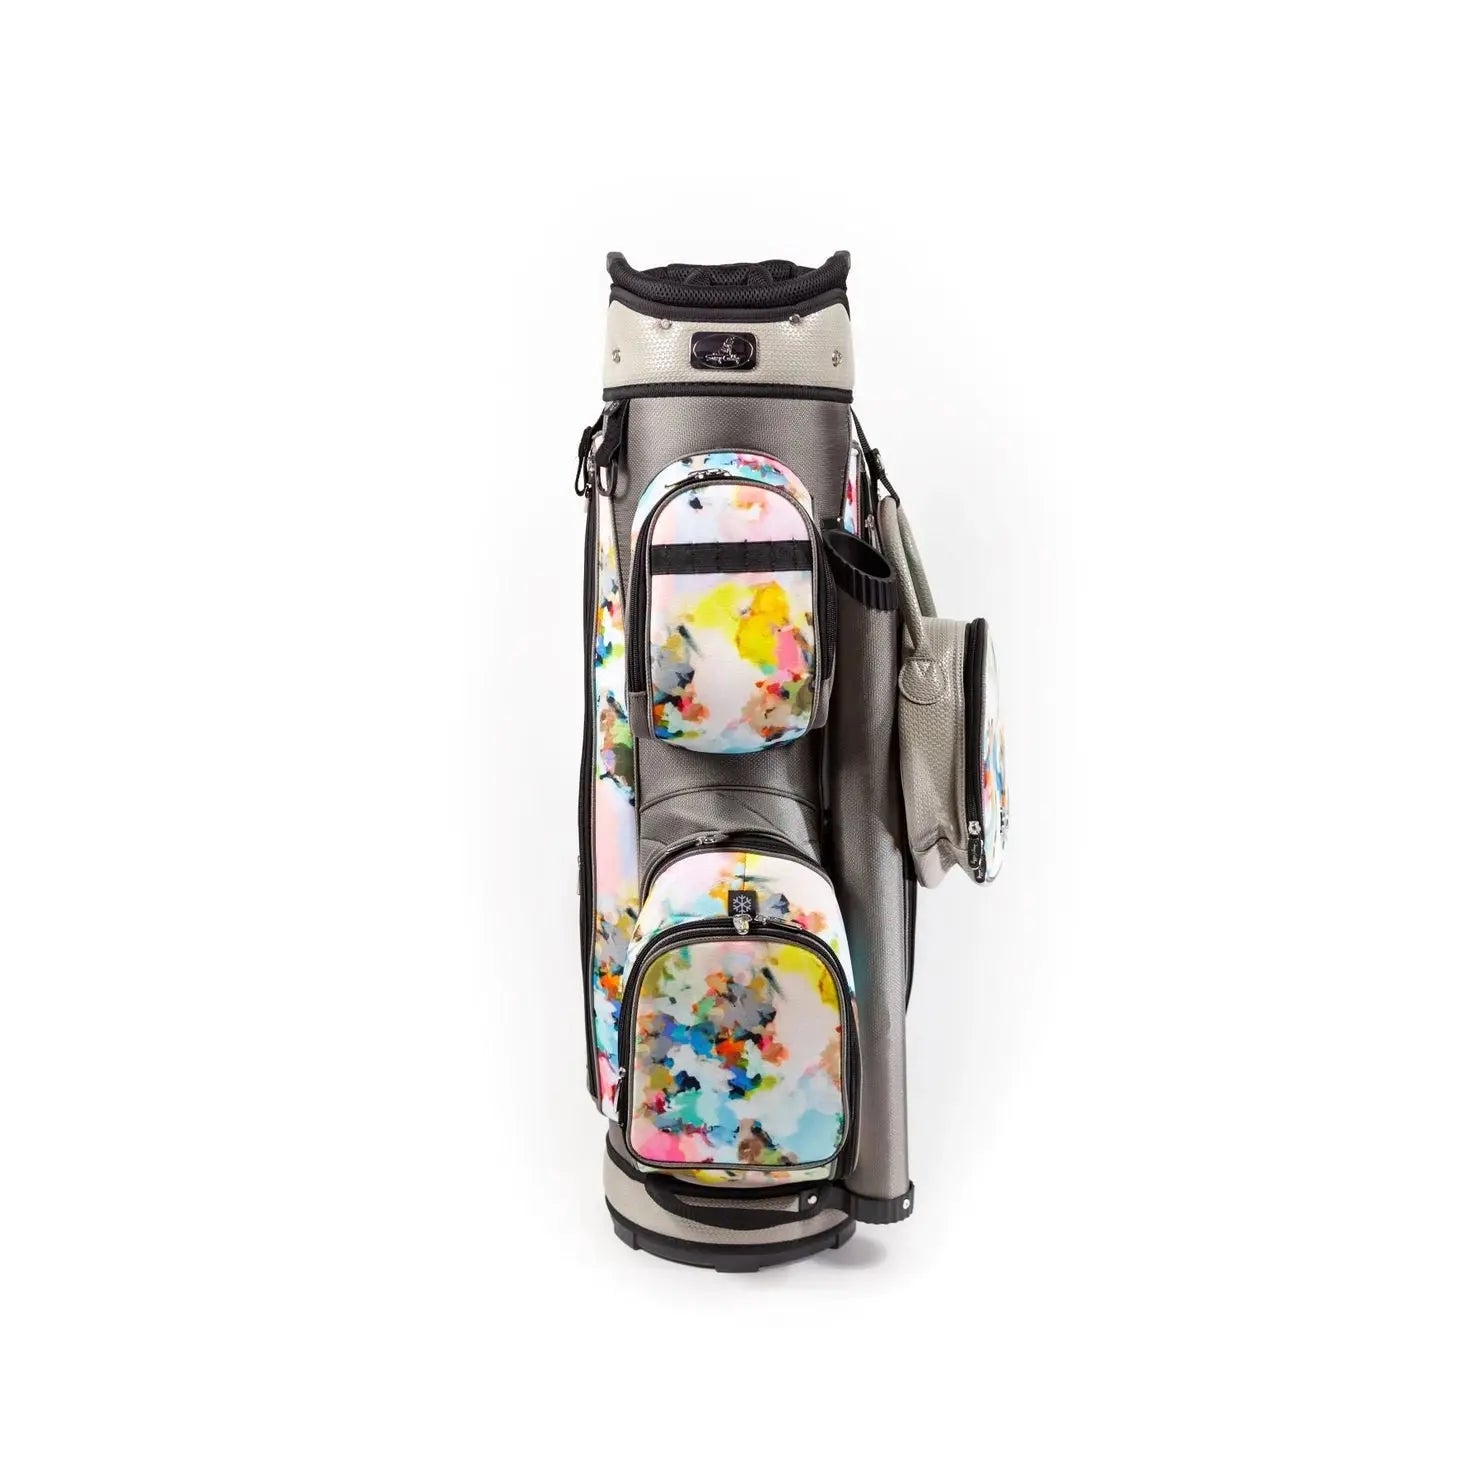 "Elevate your golf game with our Ladies Golf Bag. Stylish, functional, and designed for the female golfer. Shop now and hit the course in style!